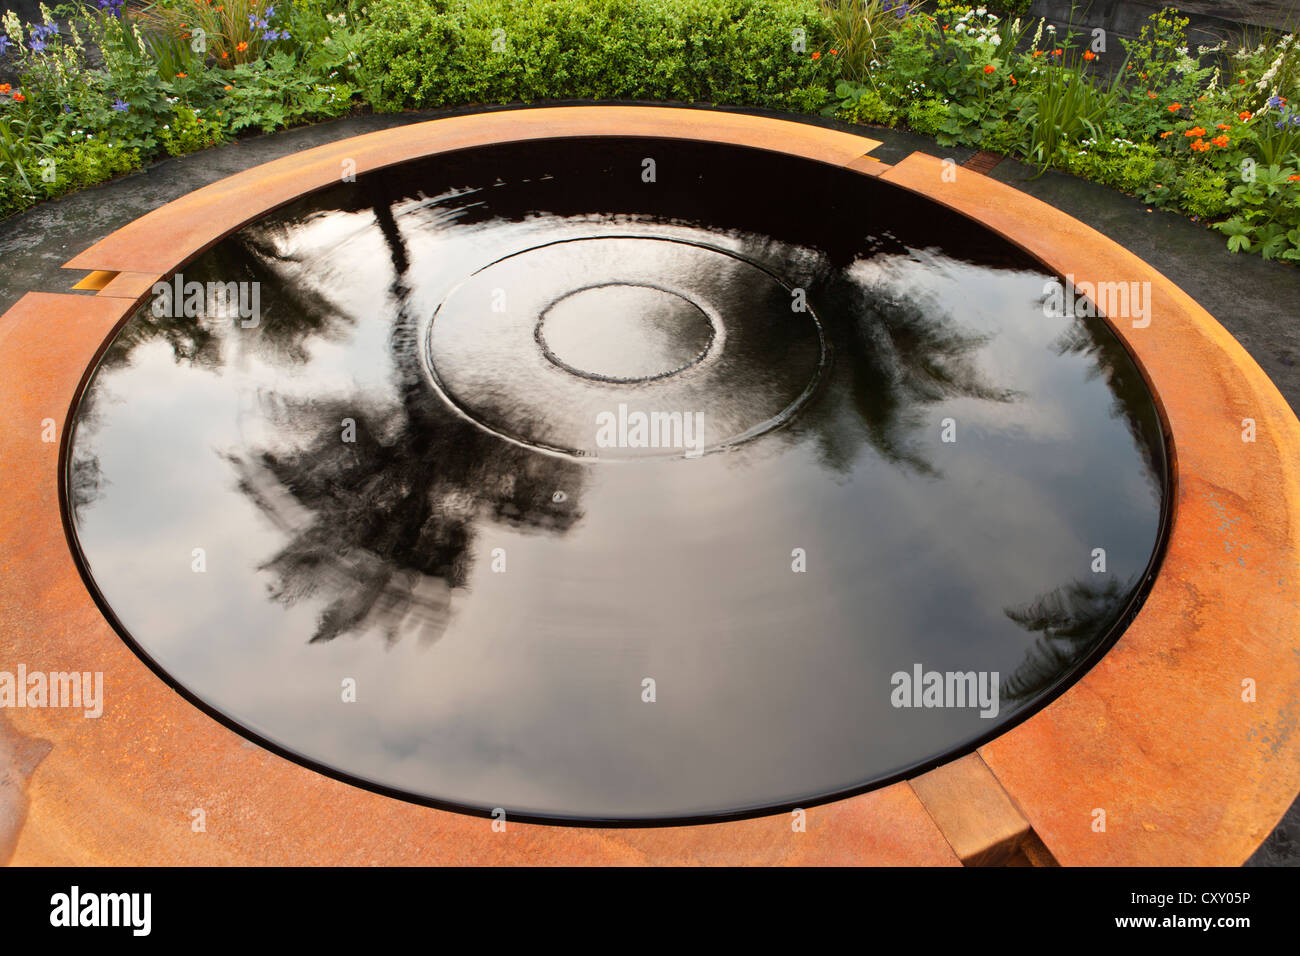 A corten steel pond pool water feature in a small urban garden in the UK Chelsea RHS flower show gardens London Stock Photo